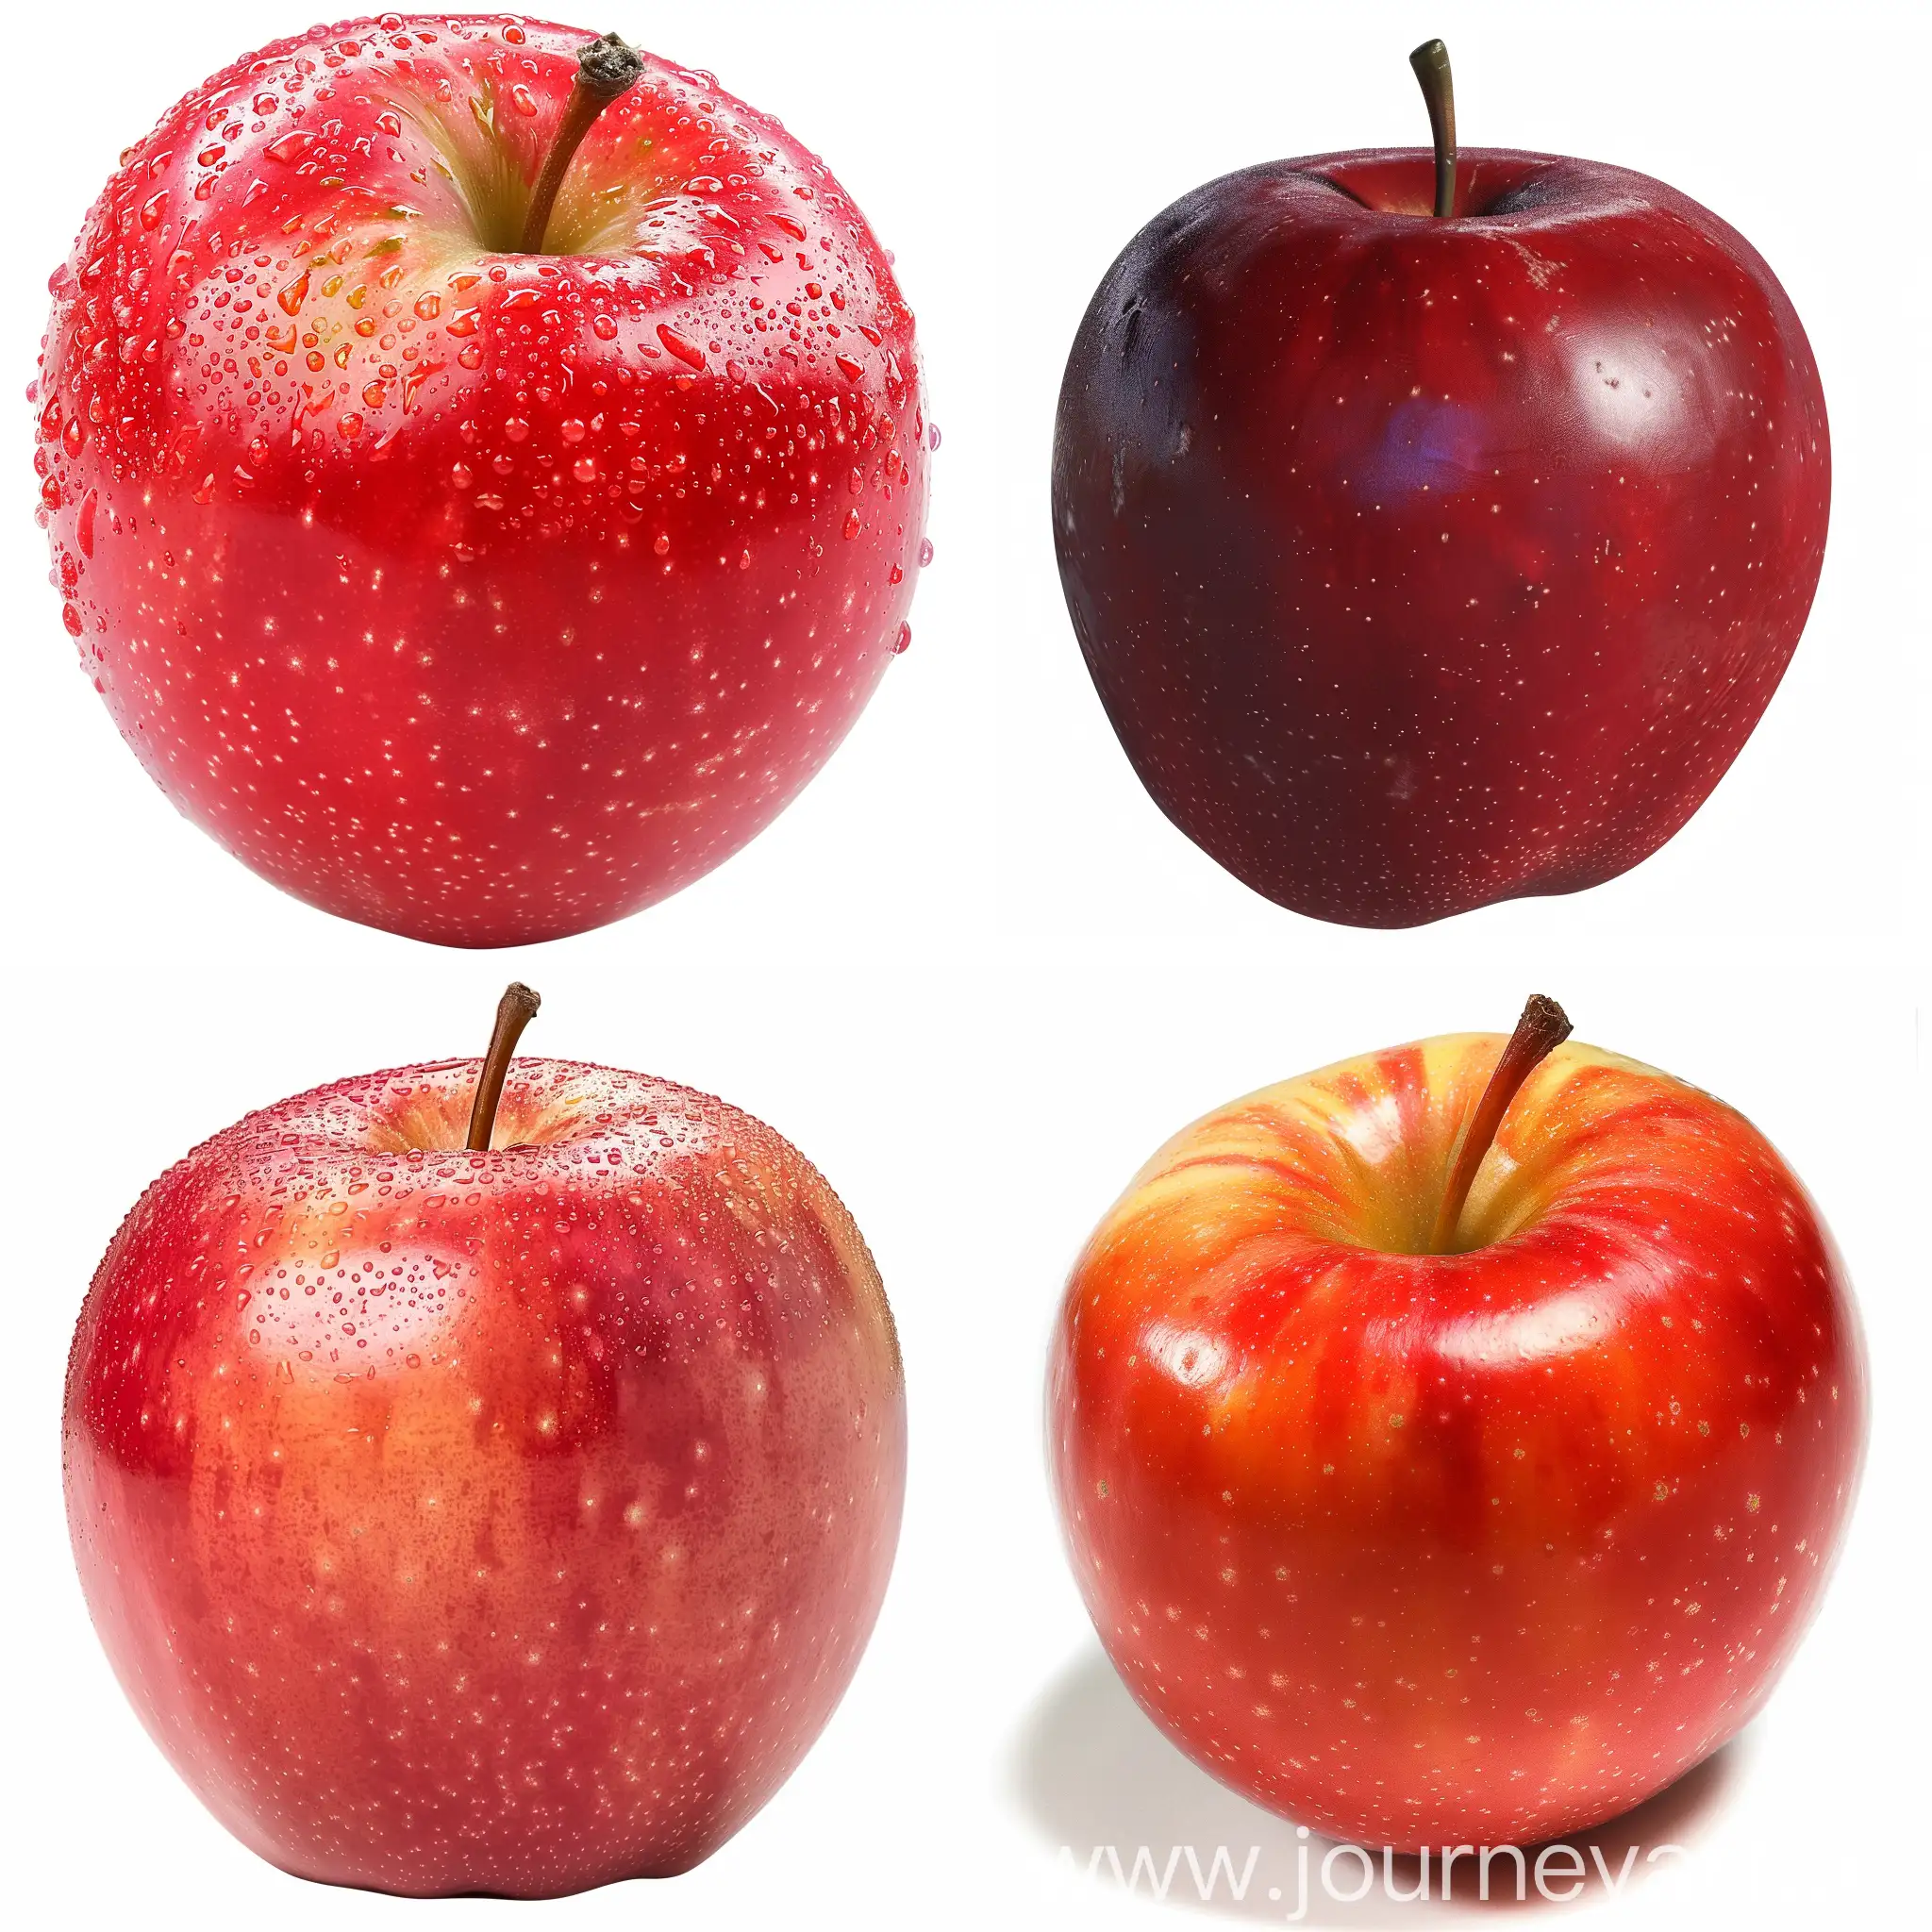 Apple
(*png)
no background